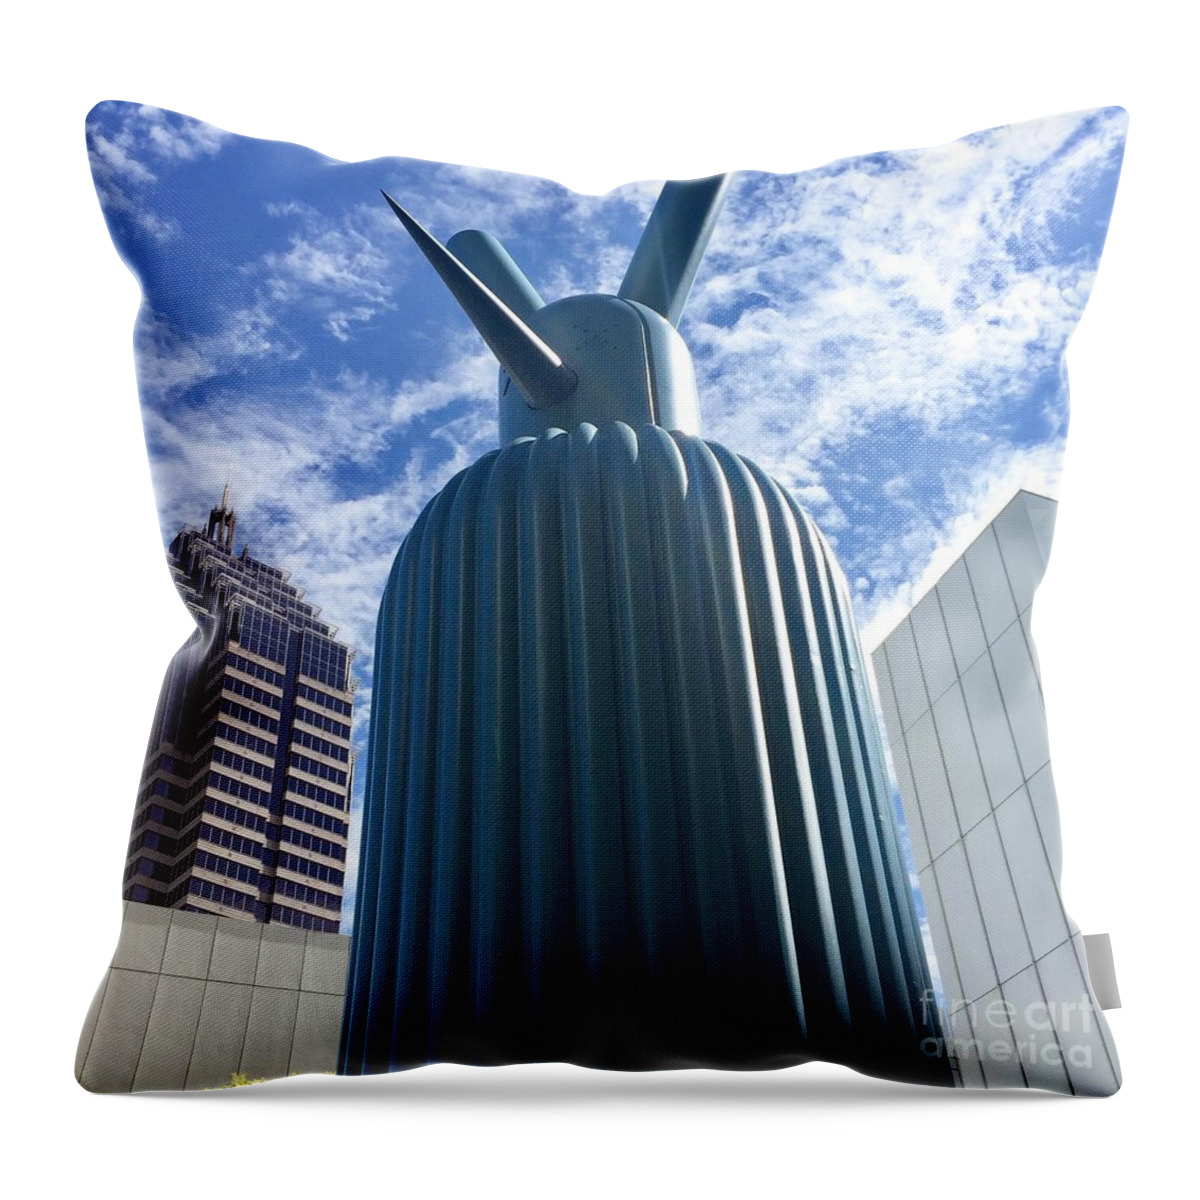 Blue Sculpture Throw Pillow featuring the photograph Blue Sculpture by Flavia Westerwelle